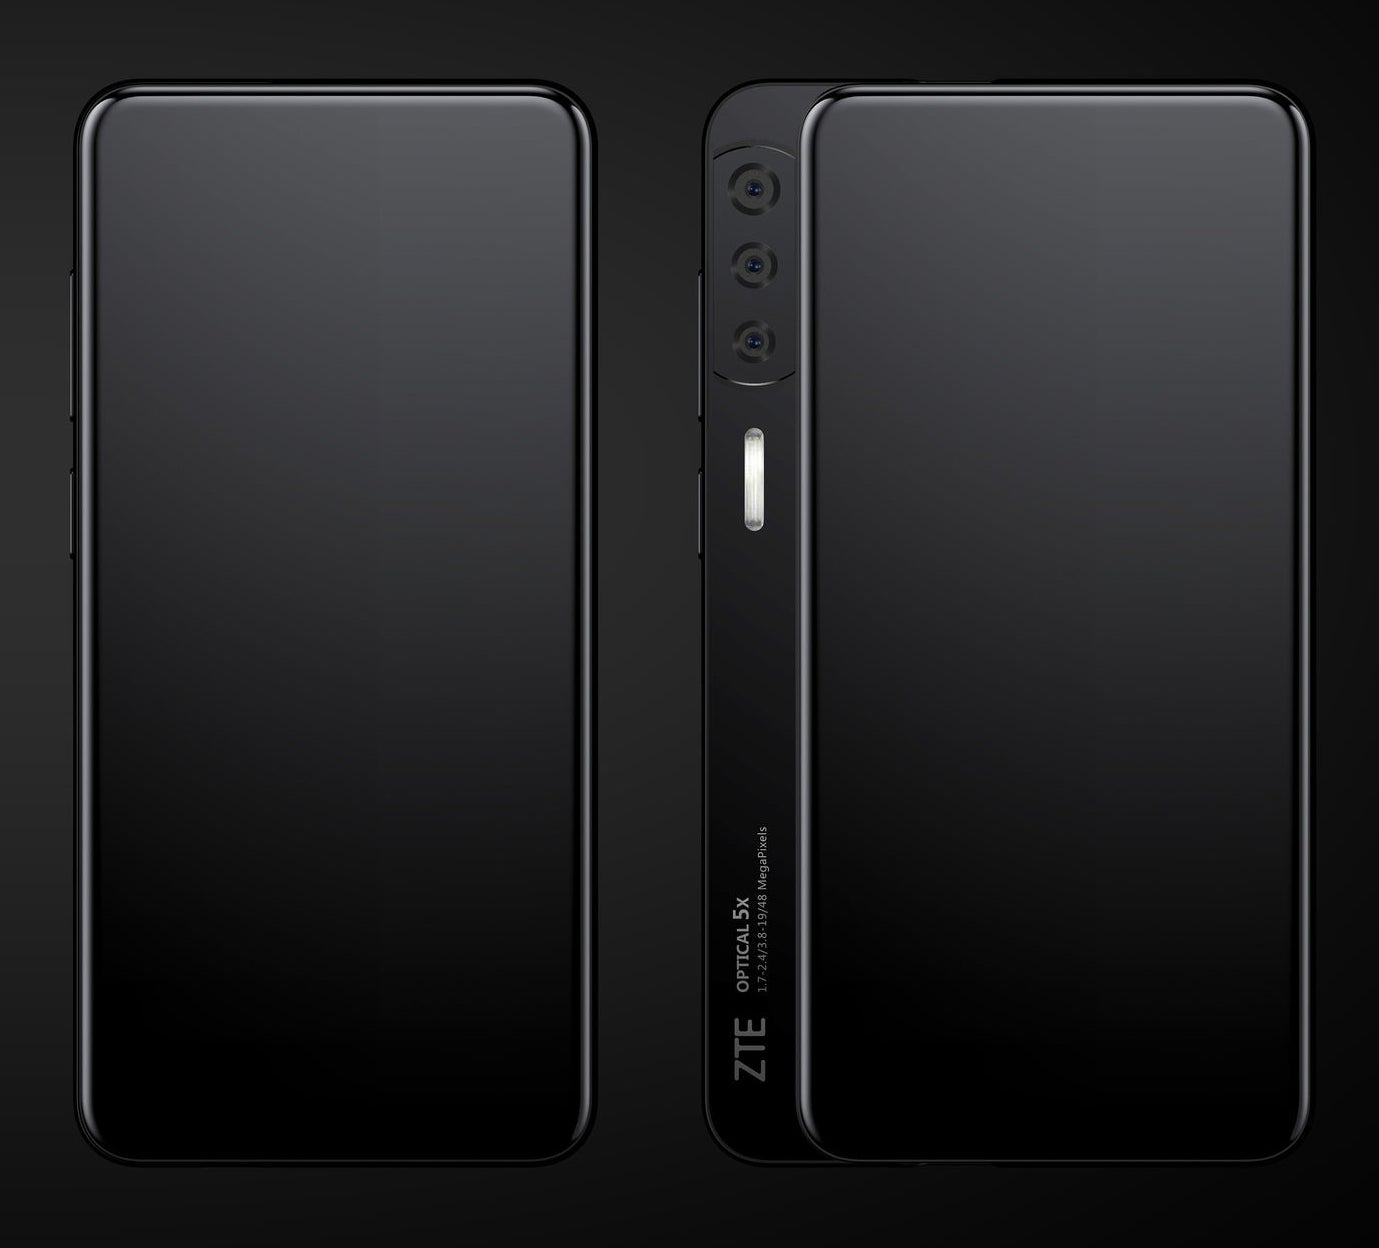 The ZTE Axon S uses a side sliding panel to house its cameras - Renders show two new ZTE concept phones that are practically all screen